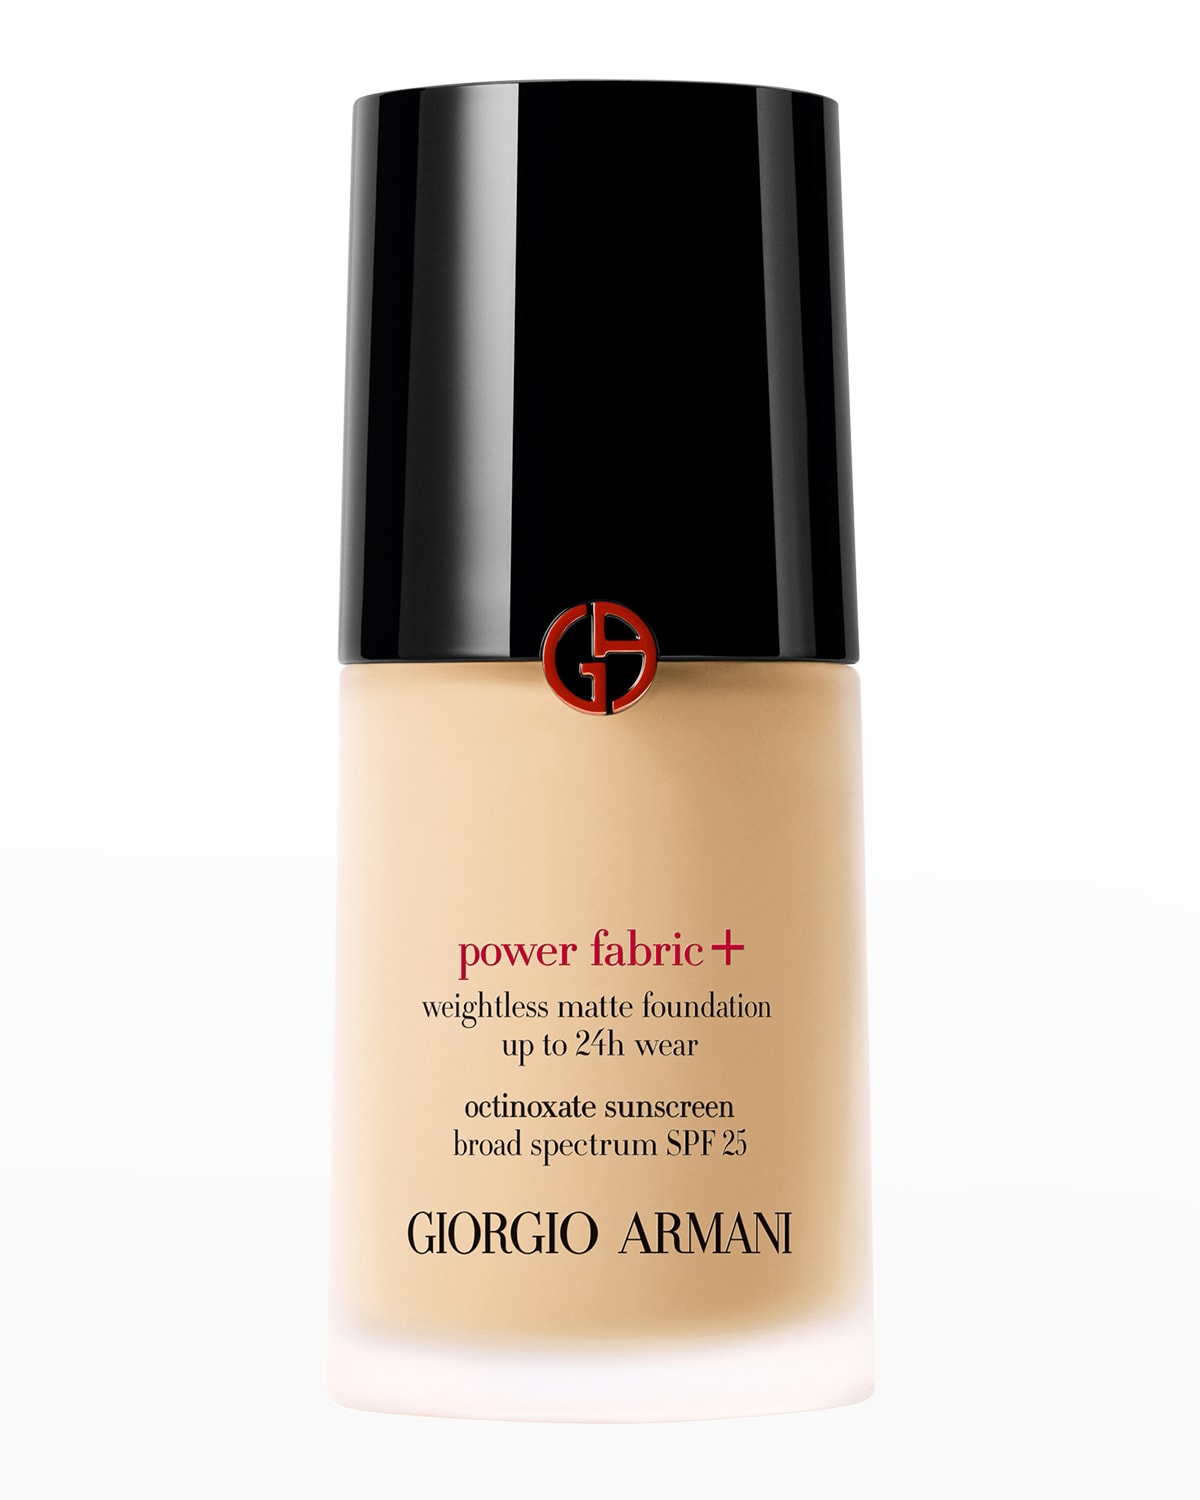 Power Fabric+ Matte Foundation with Broad-Spectrum SPF 25